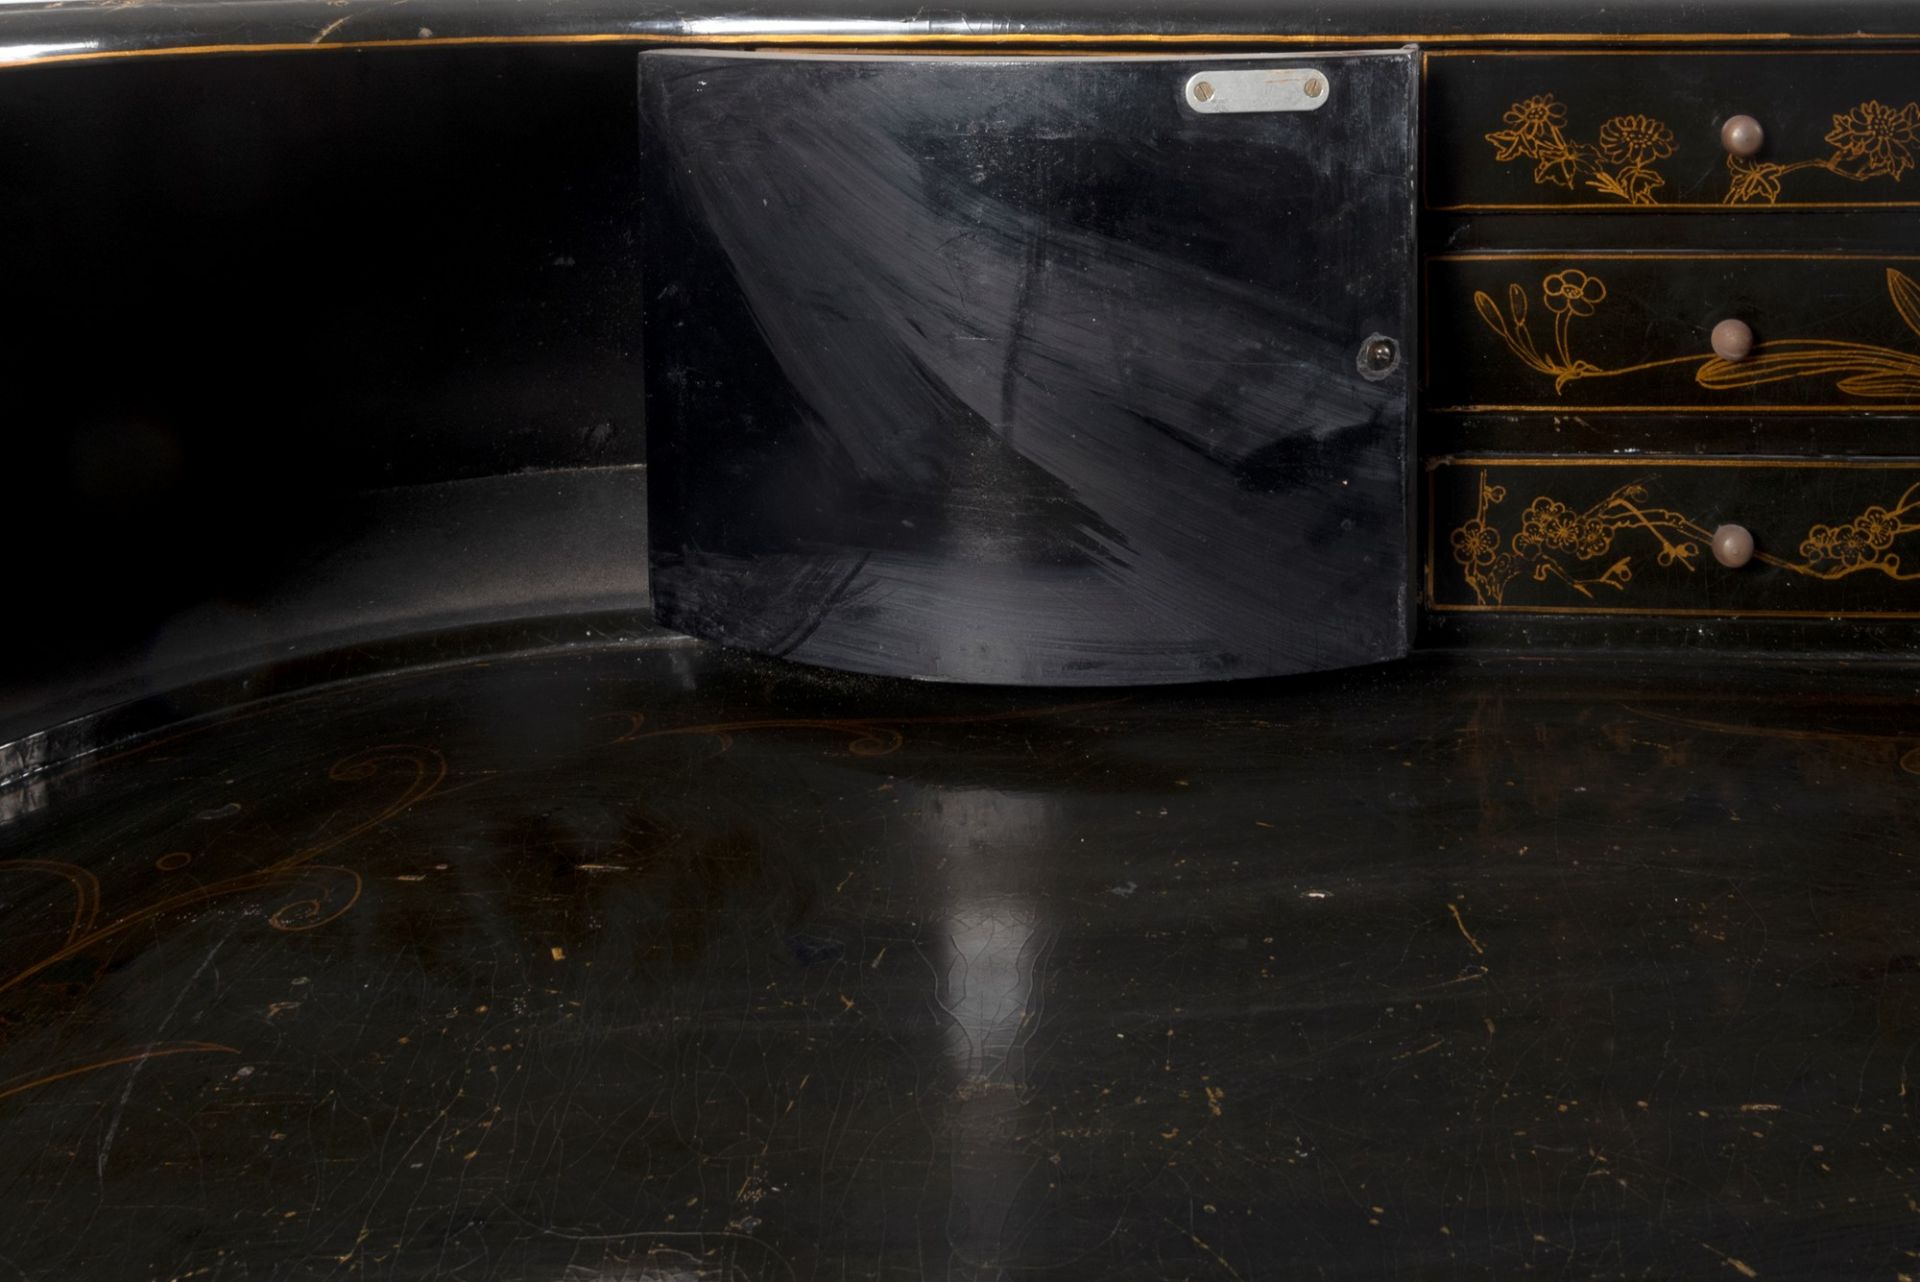 Carlton House desk in black lacquered wood decorated with Chinoserie, early 20th century - Image 4 of 6